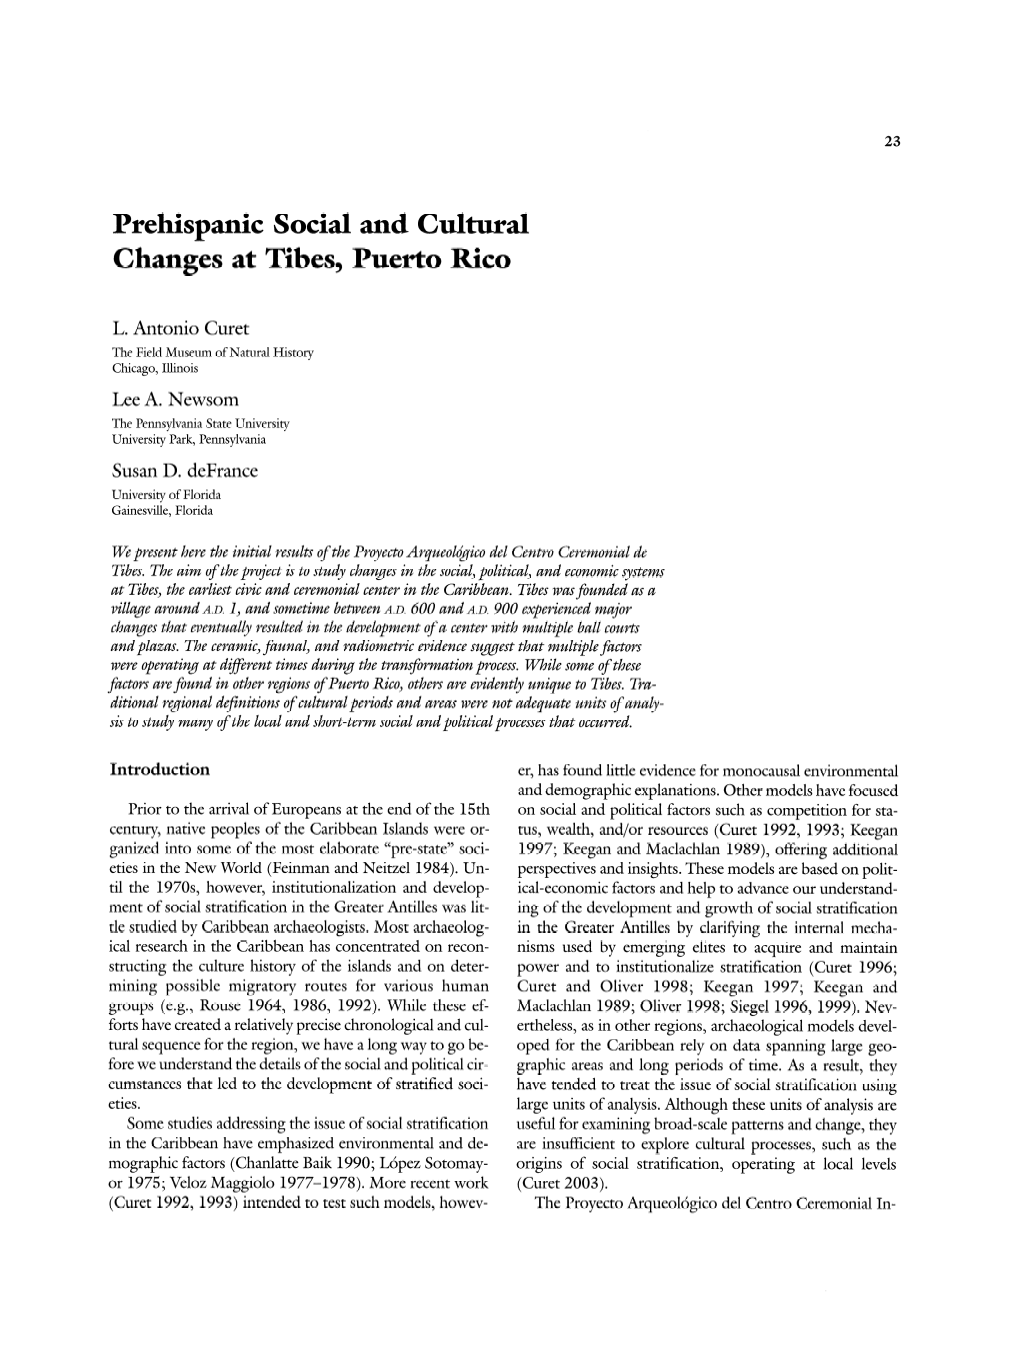 Prehispanic Social and Cultural Changes at Tibes, Puerto Rico